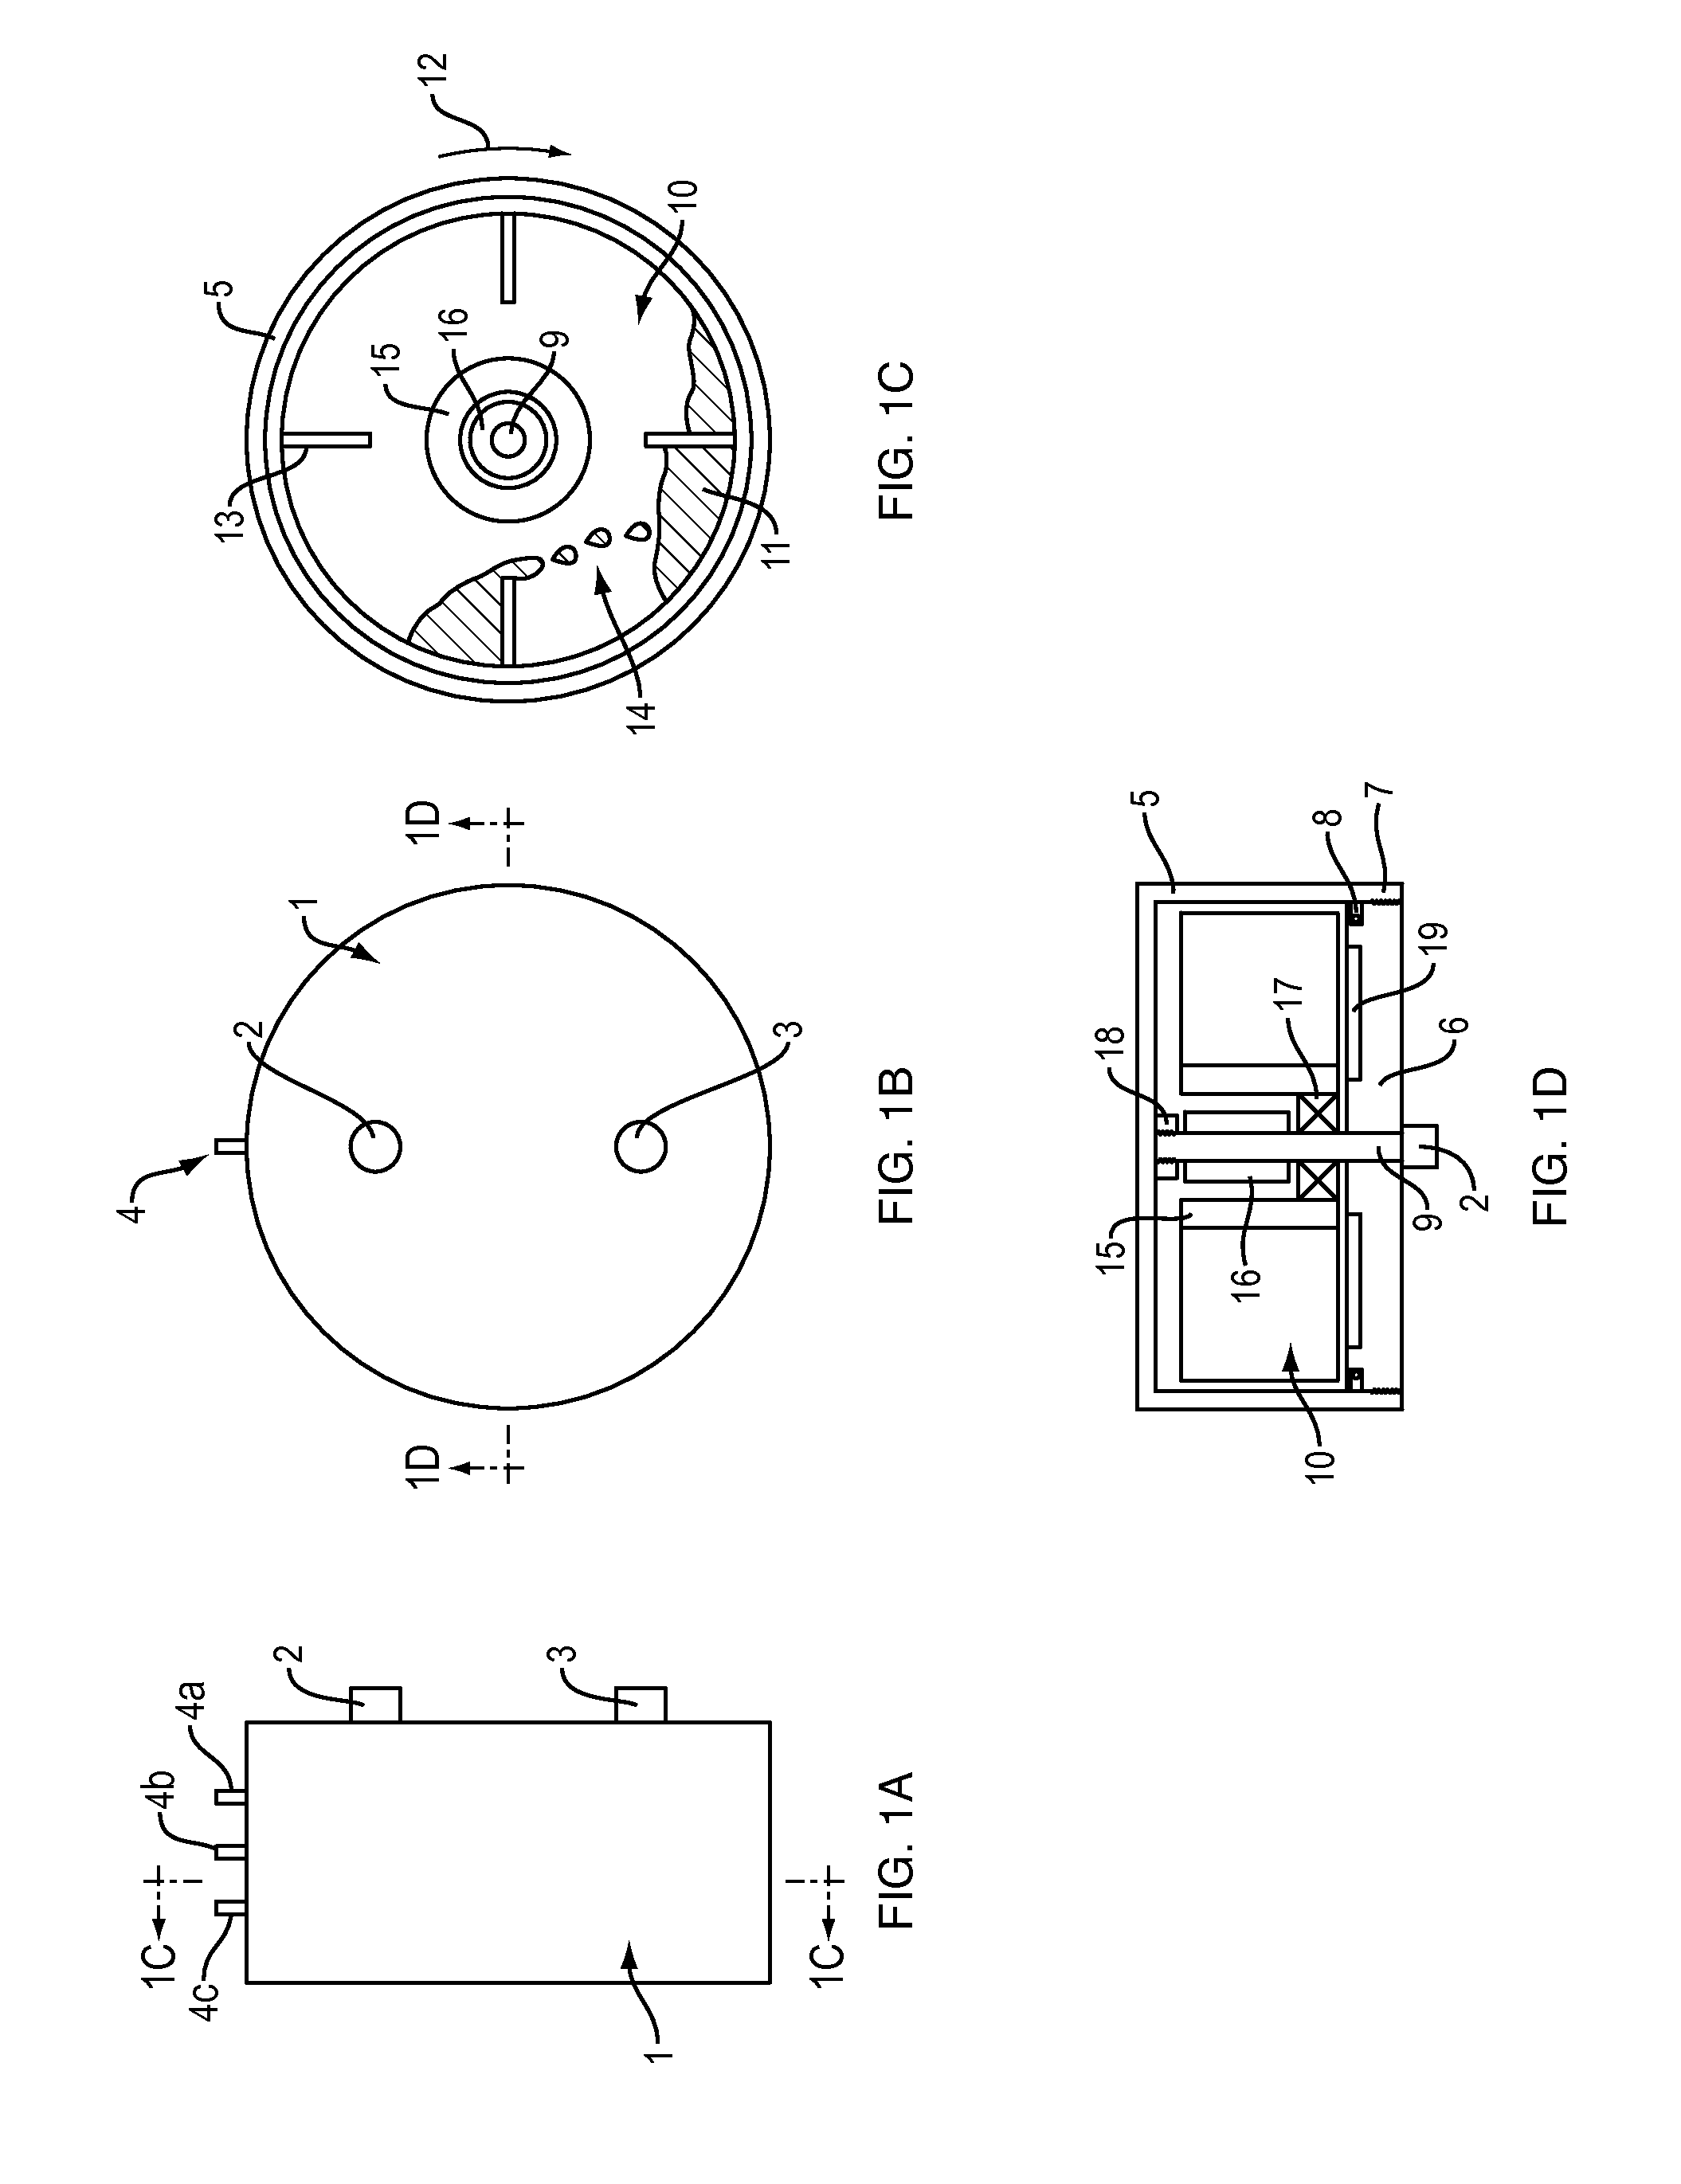 System and Method for Renewable Fuel Using Sealed Reaction Chambers